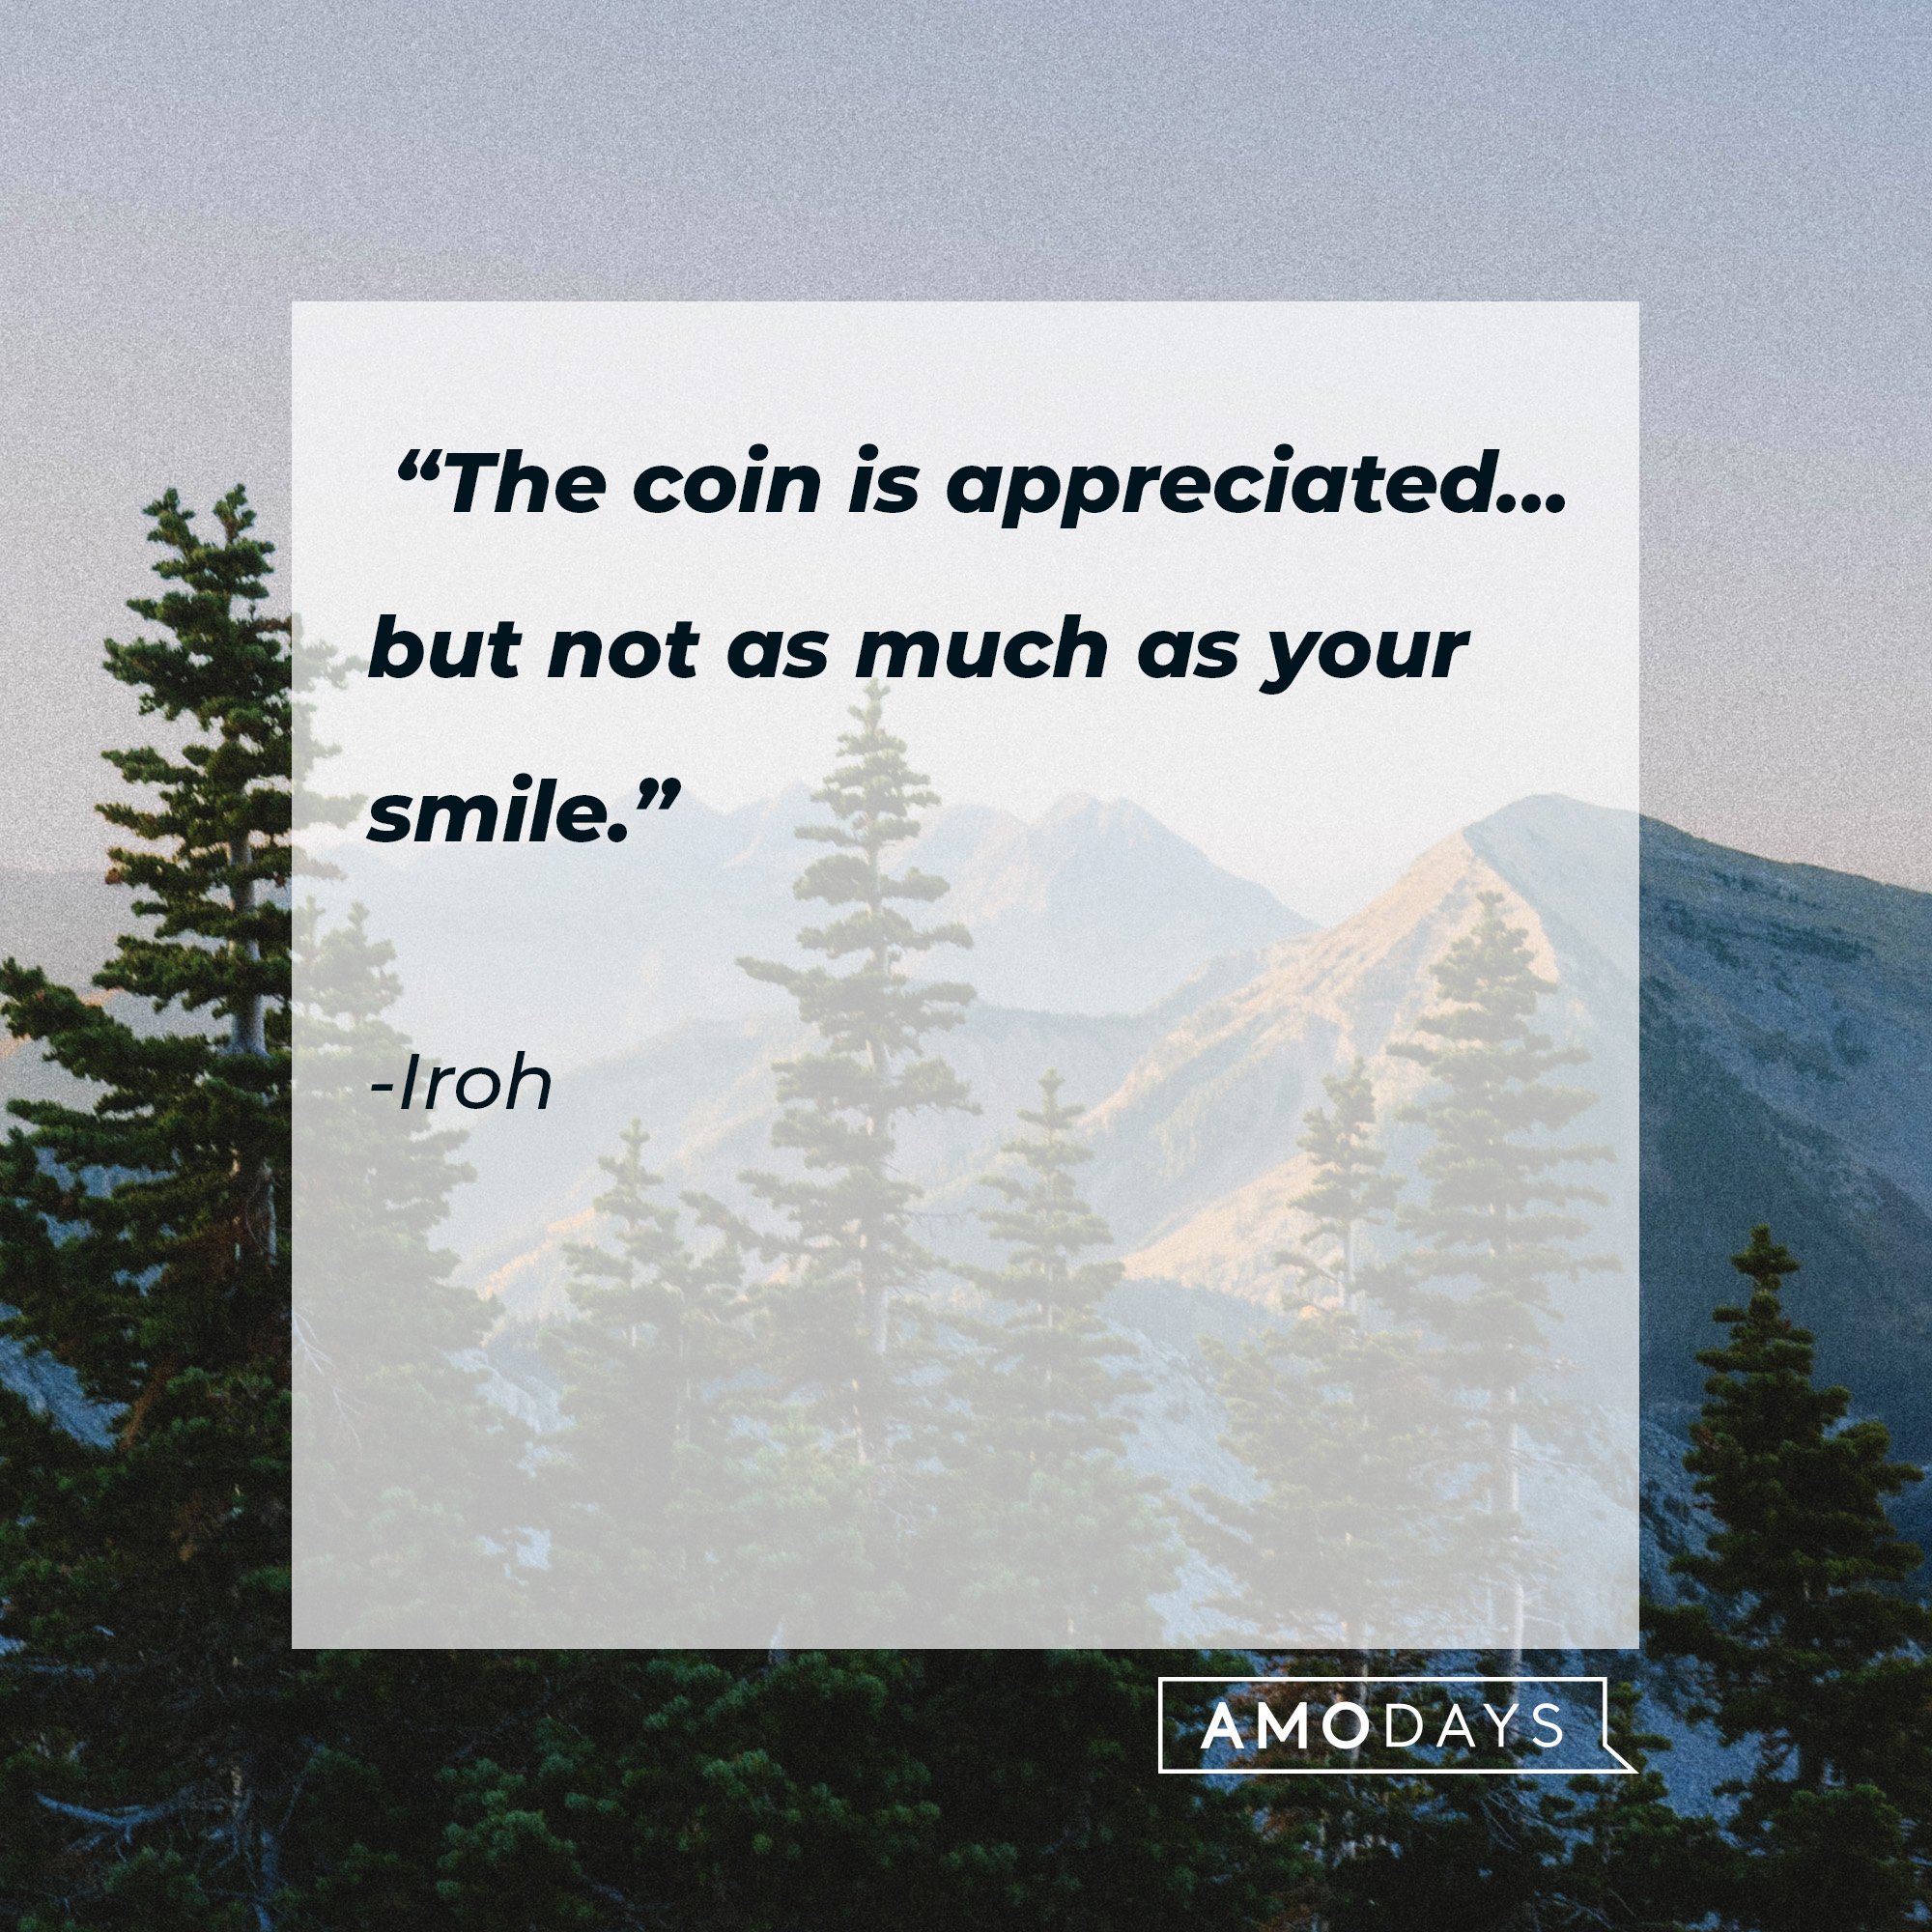  Iroh's quote: “The coin is appreciated…but not as much as your smile.” | Image: AmoDays